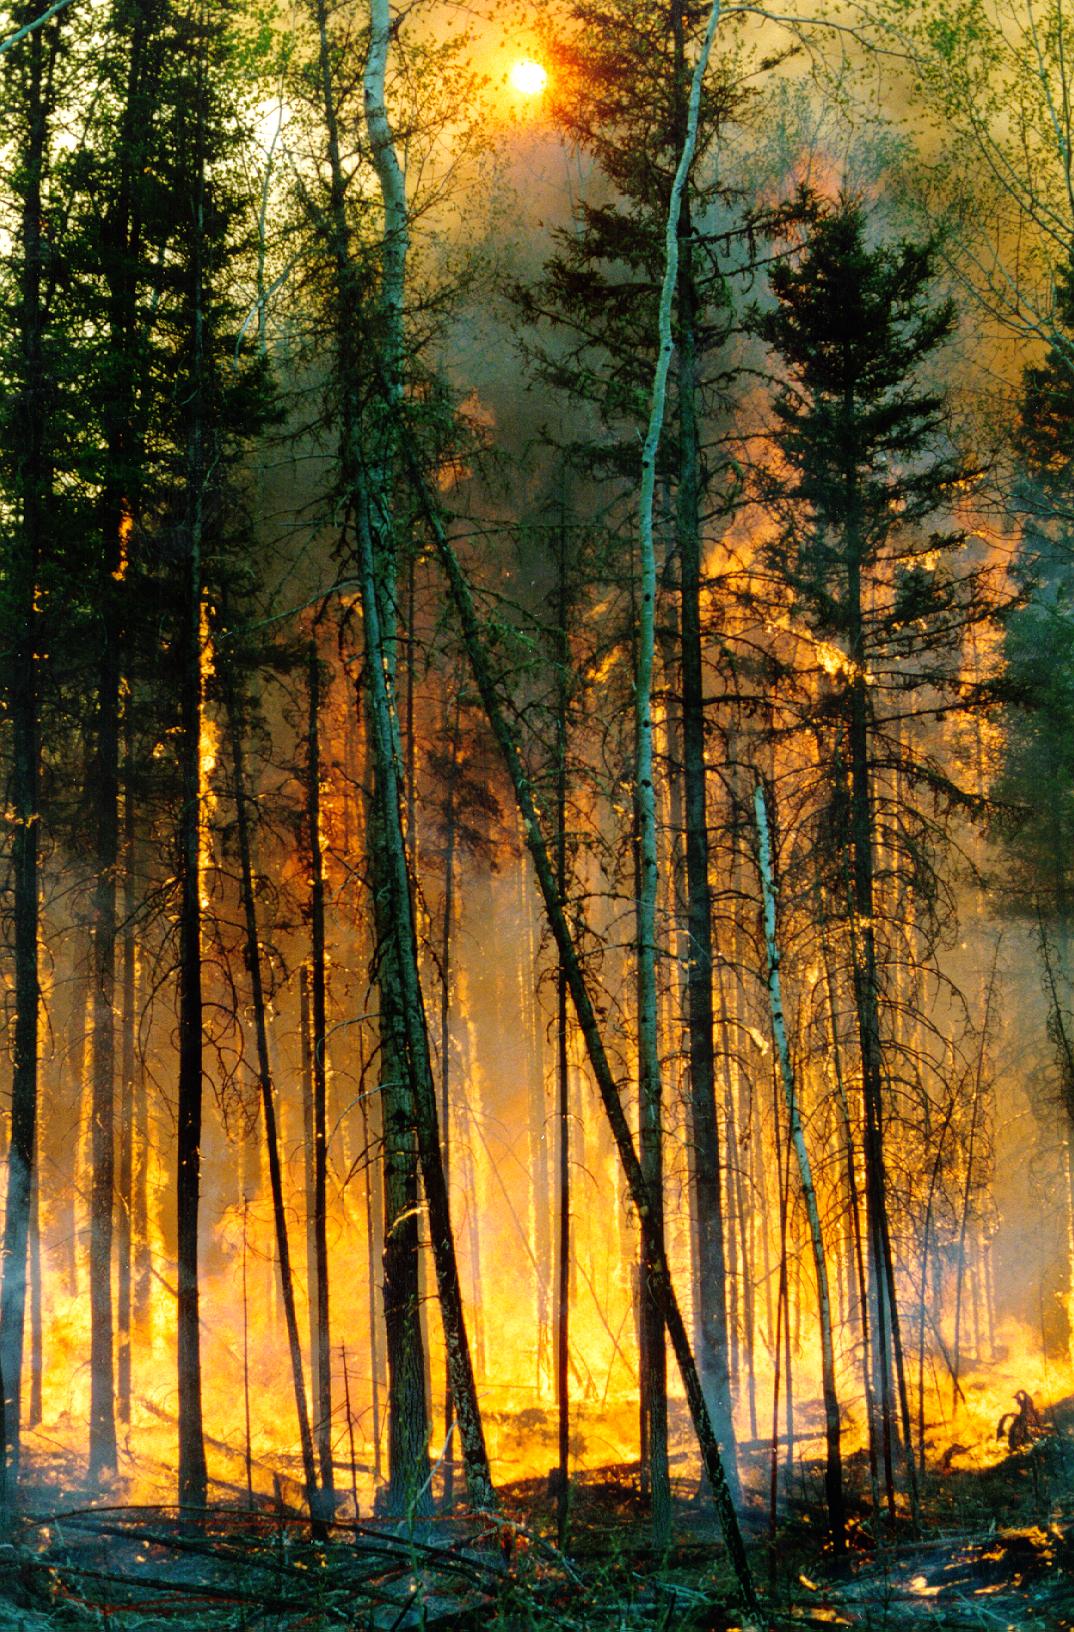 Wildfire in a boreal forest stand